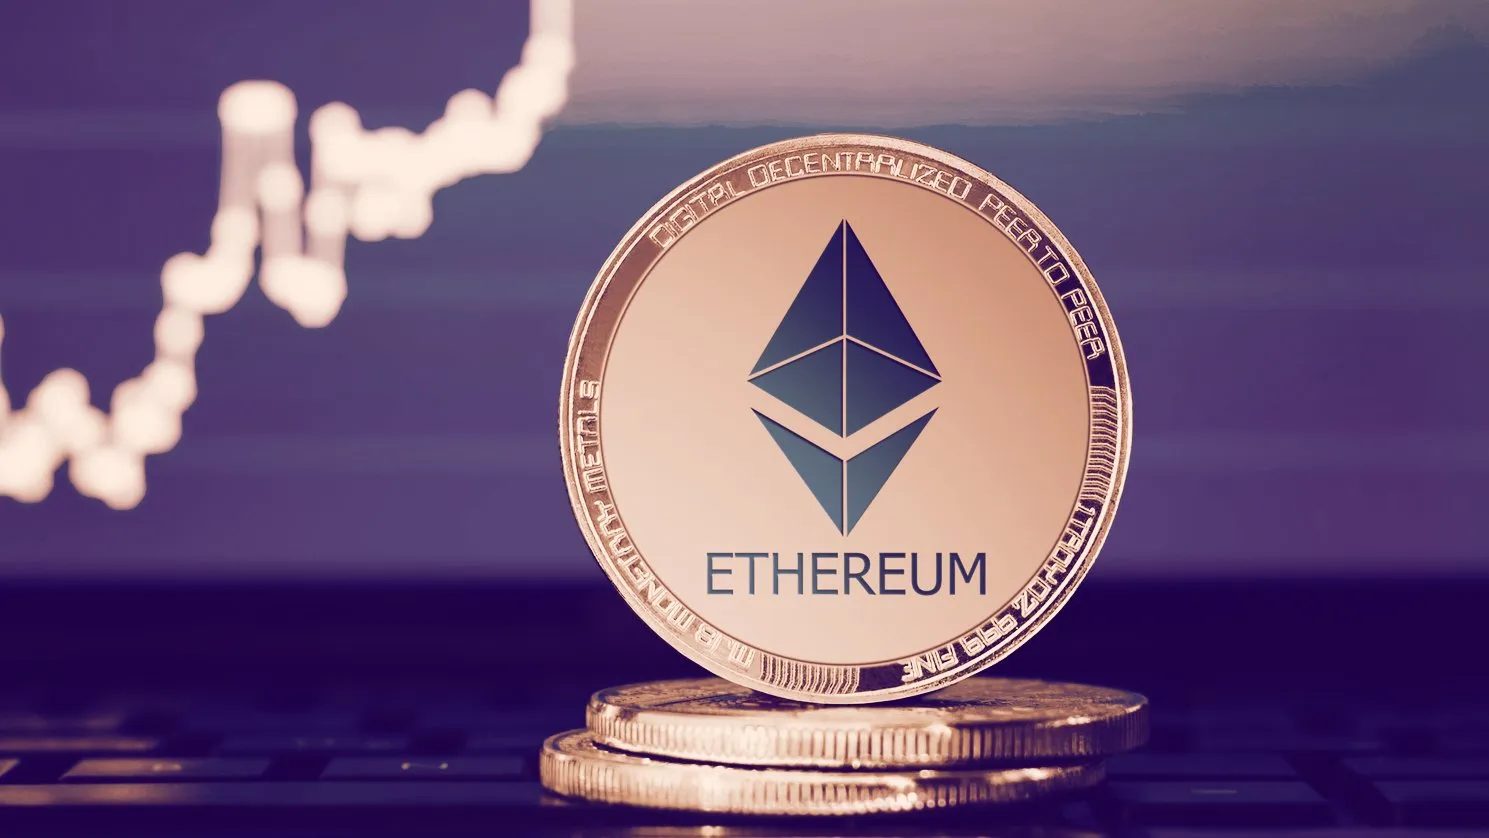 Ethereum 2.0 is the next generation of the popular blockchain. Image: Shutterstock